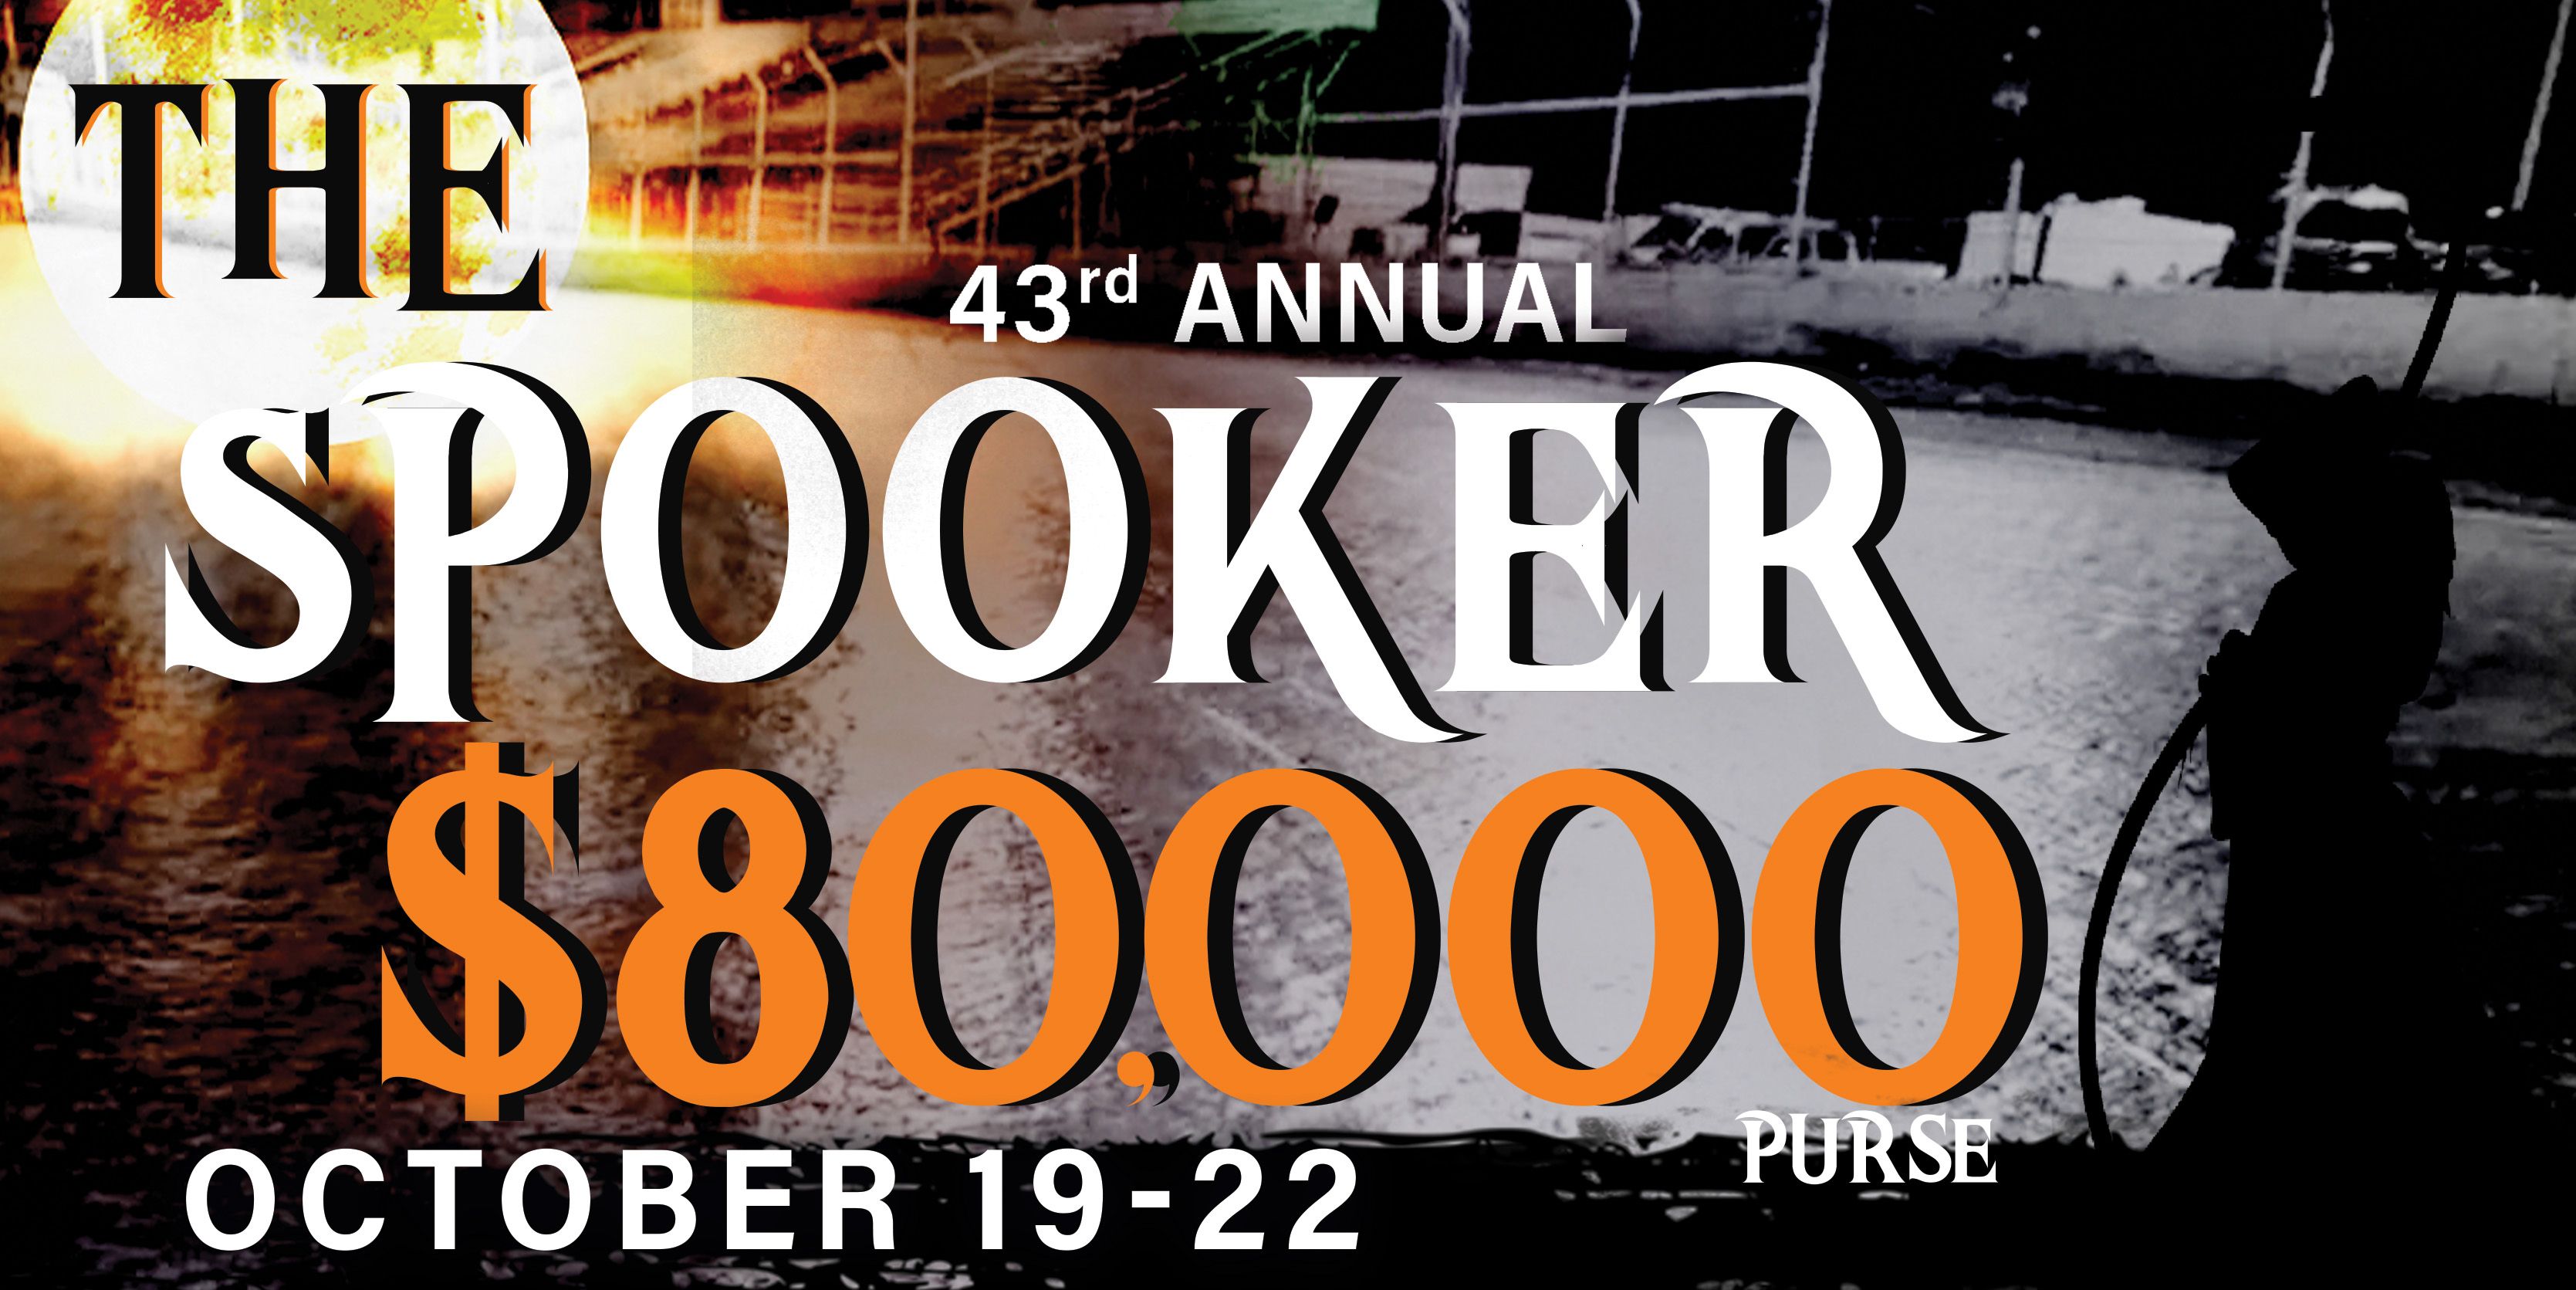 The 43rd Annual Spooker!